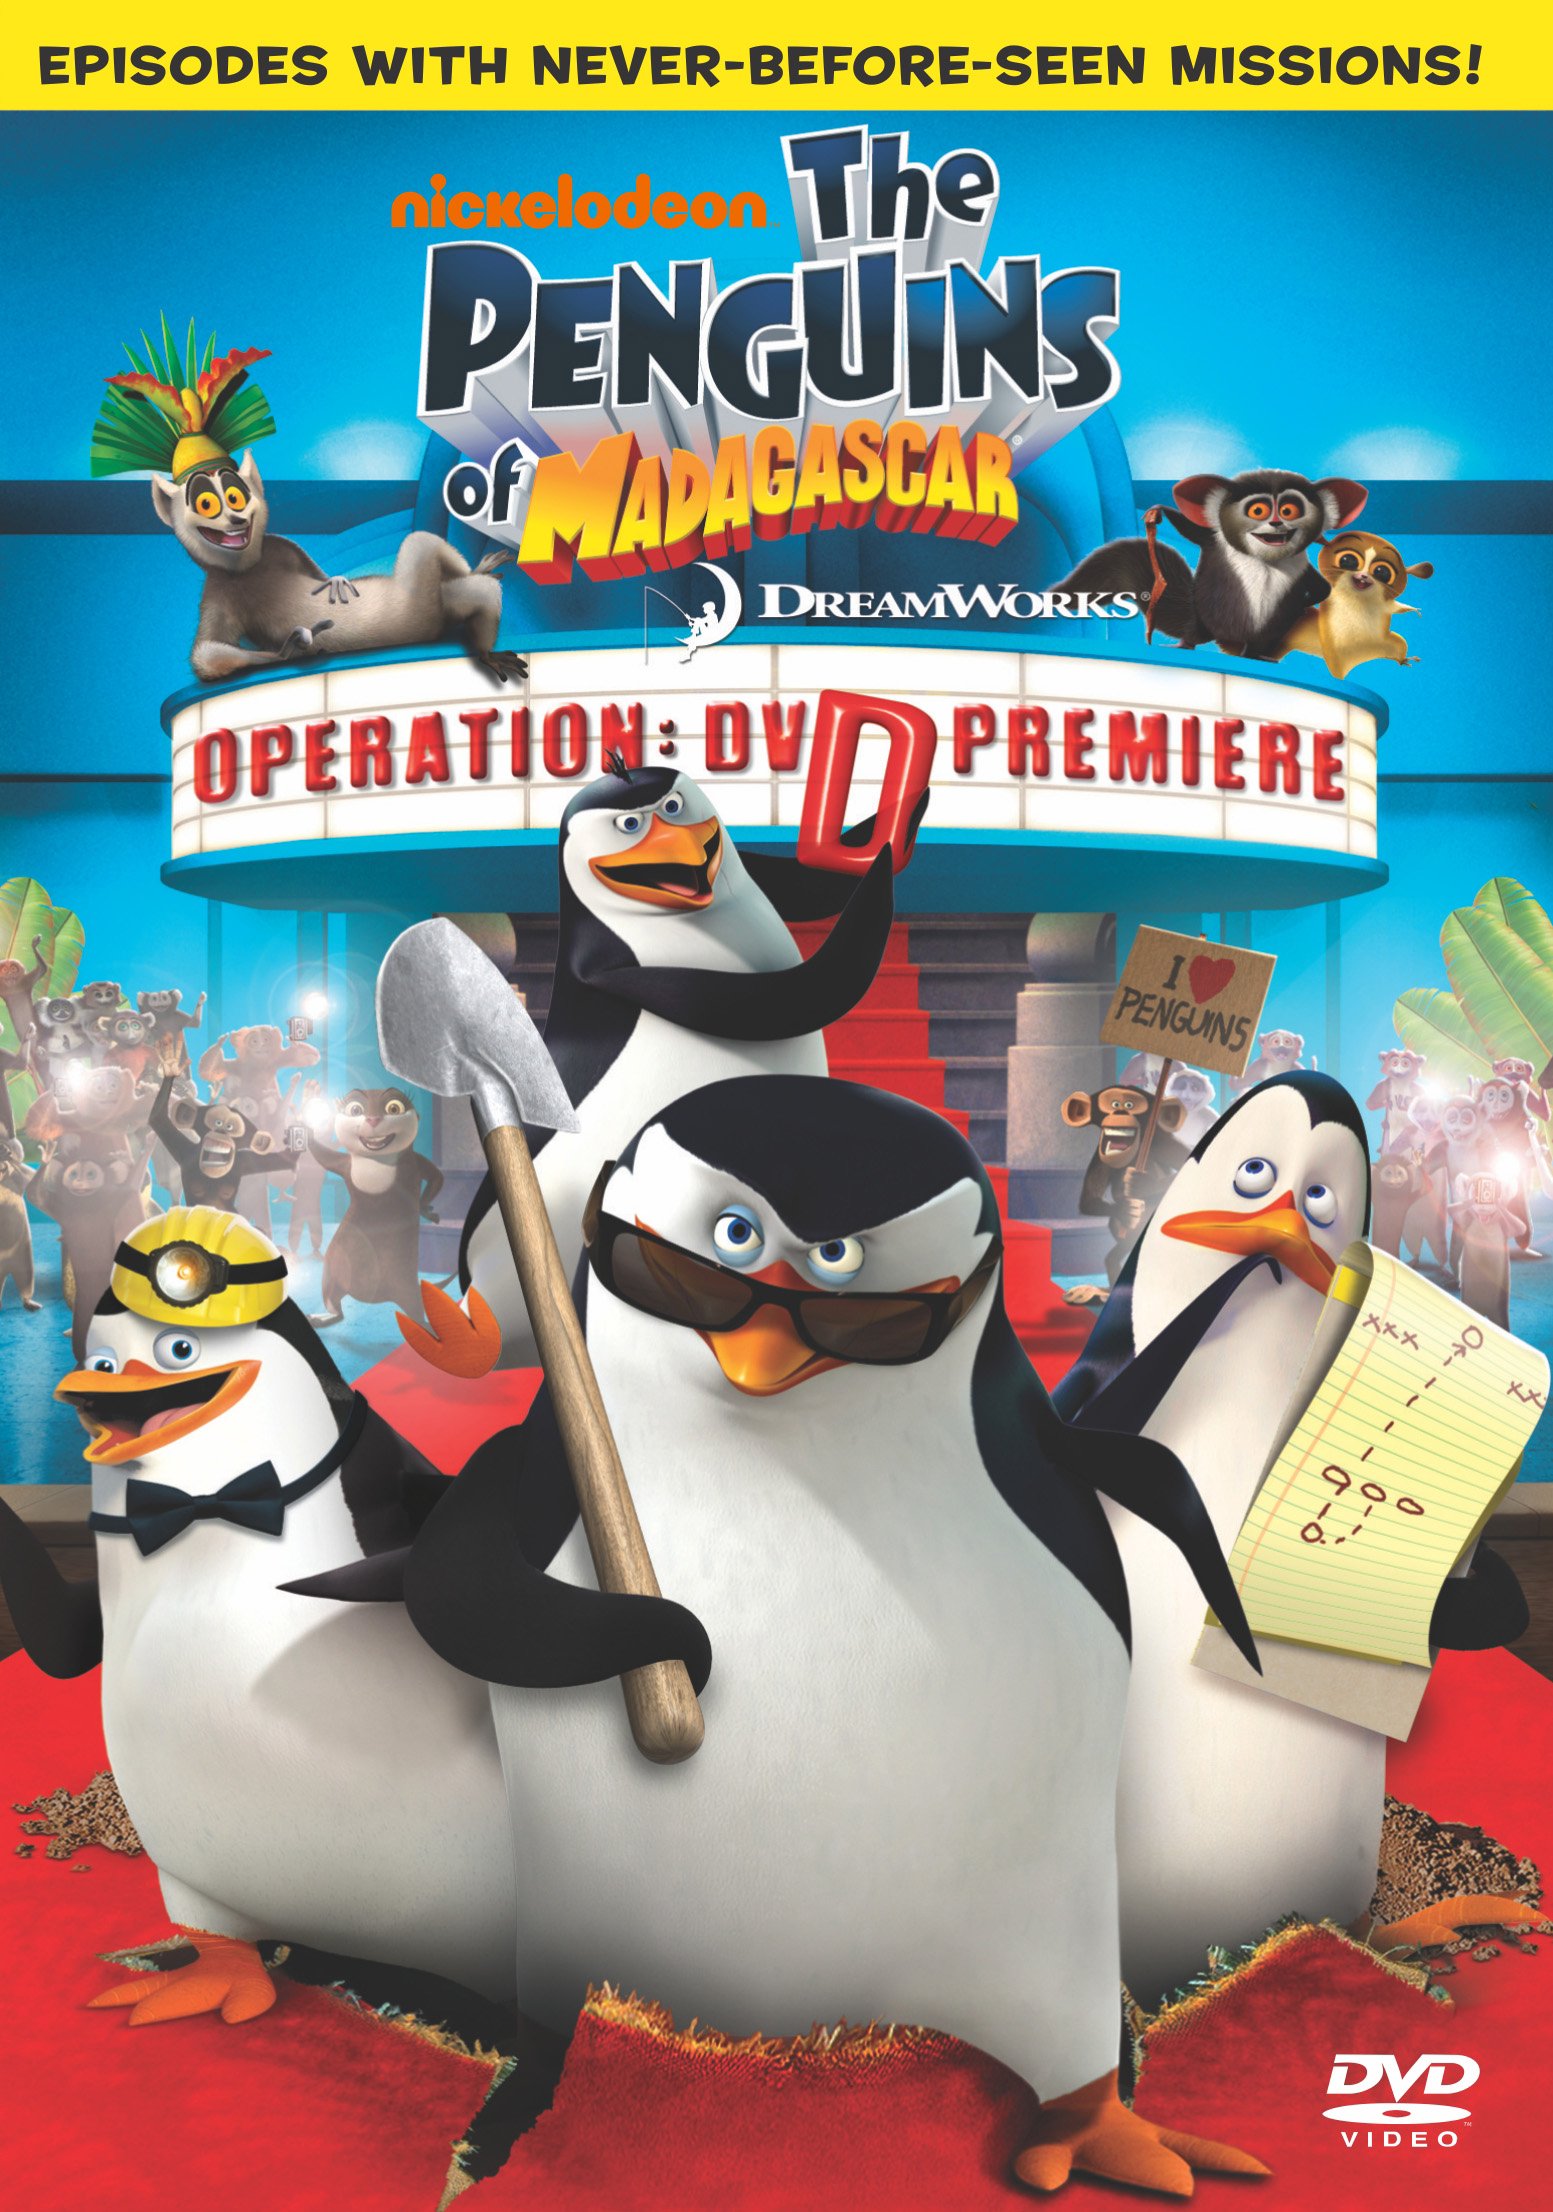 penguins-of-madagascar-operation-dvd-premiere-movie-purchase-or-watch